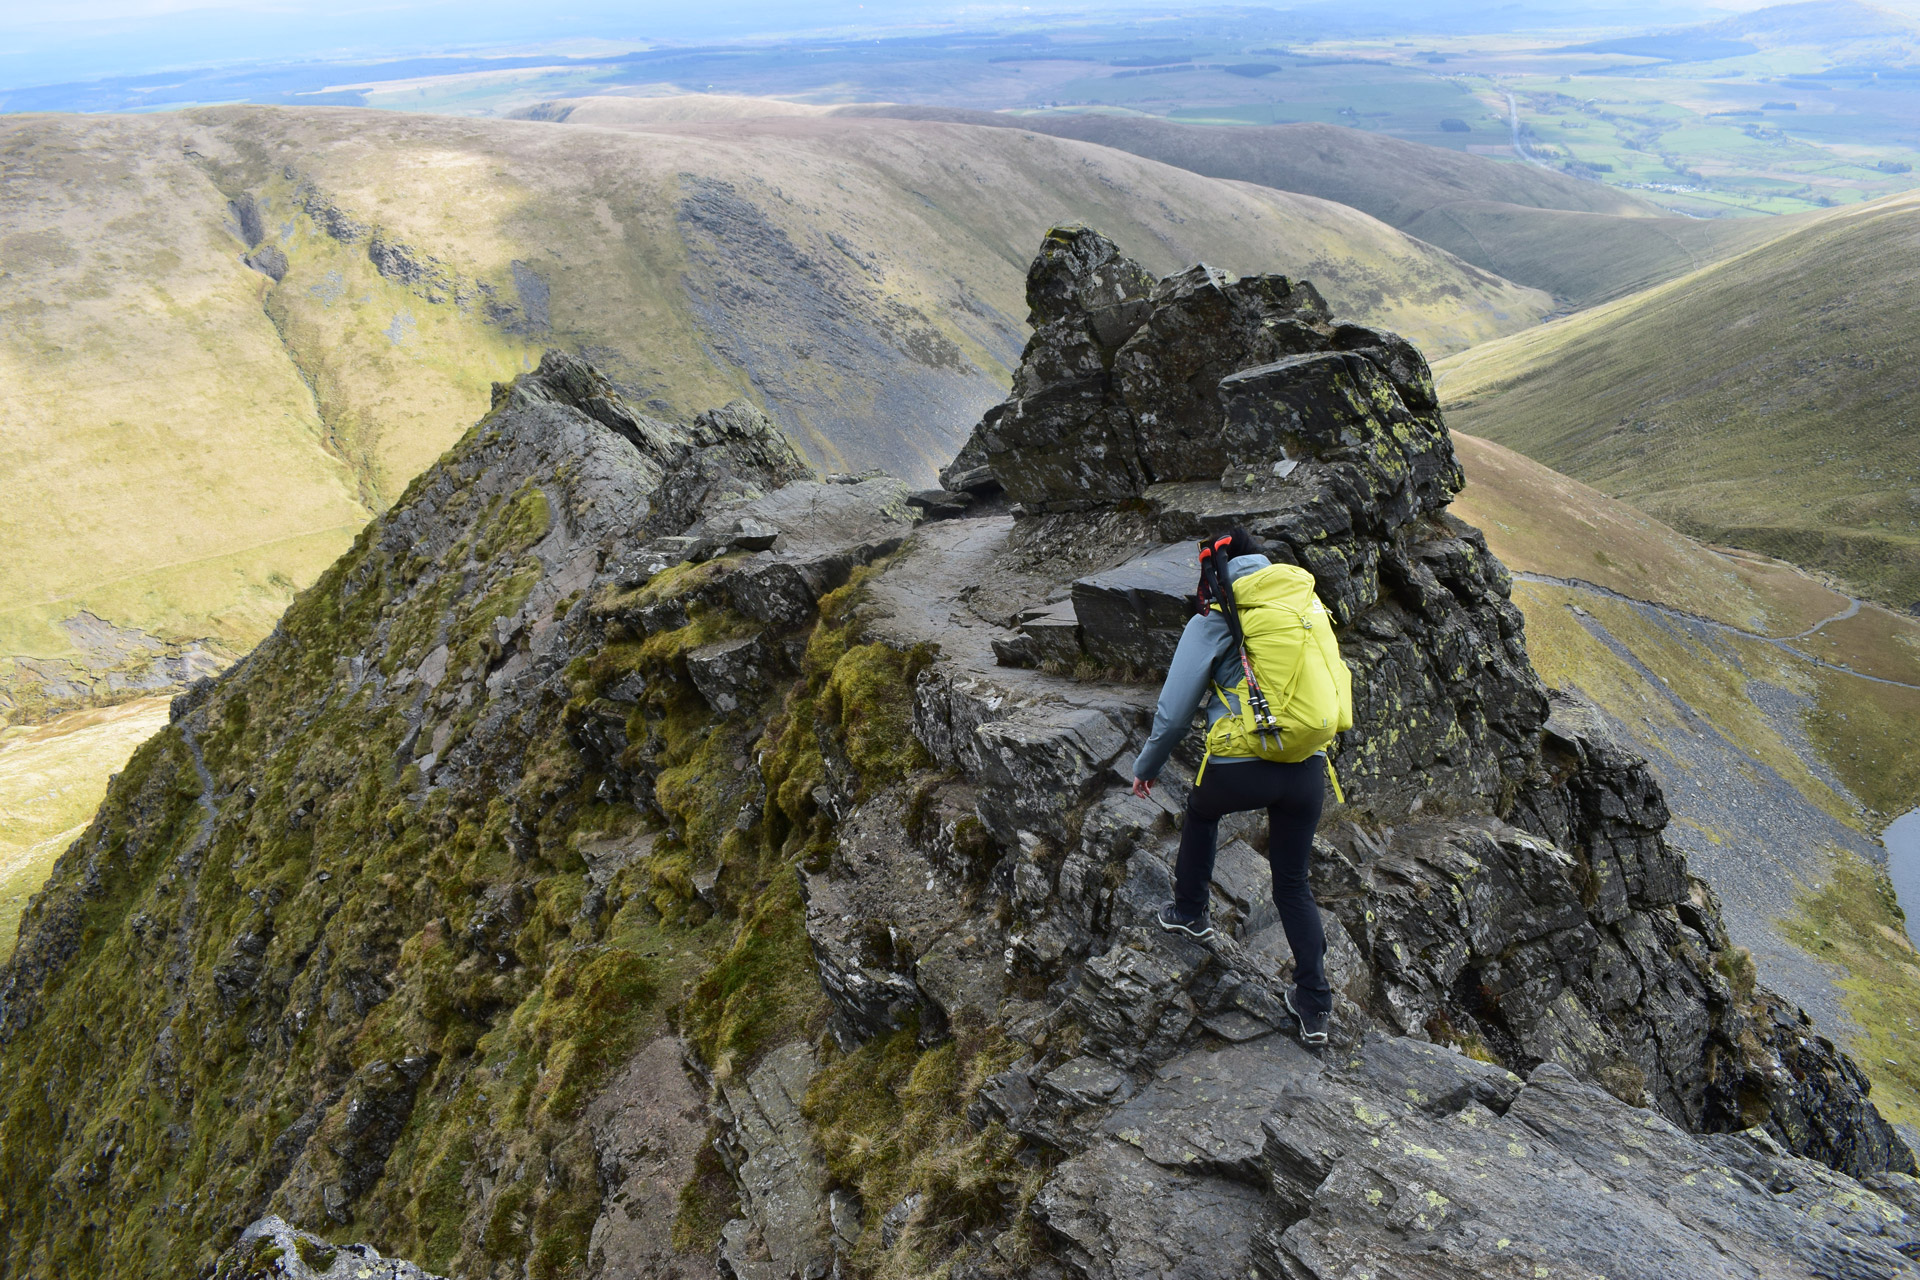 Bad-Step-Sharp-Edge-Blencathra-Things-To-Do-In-The-Lake-District